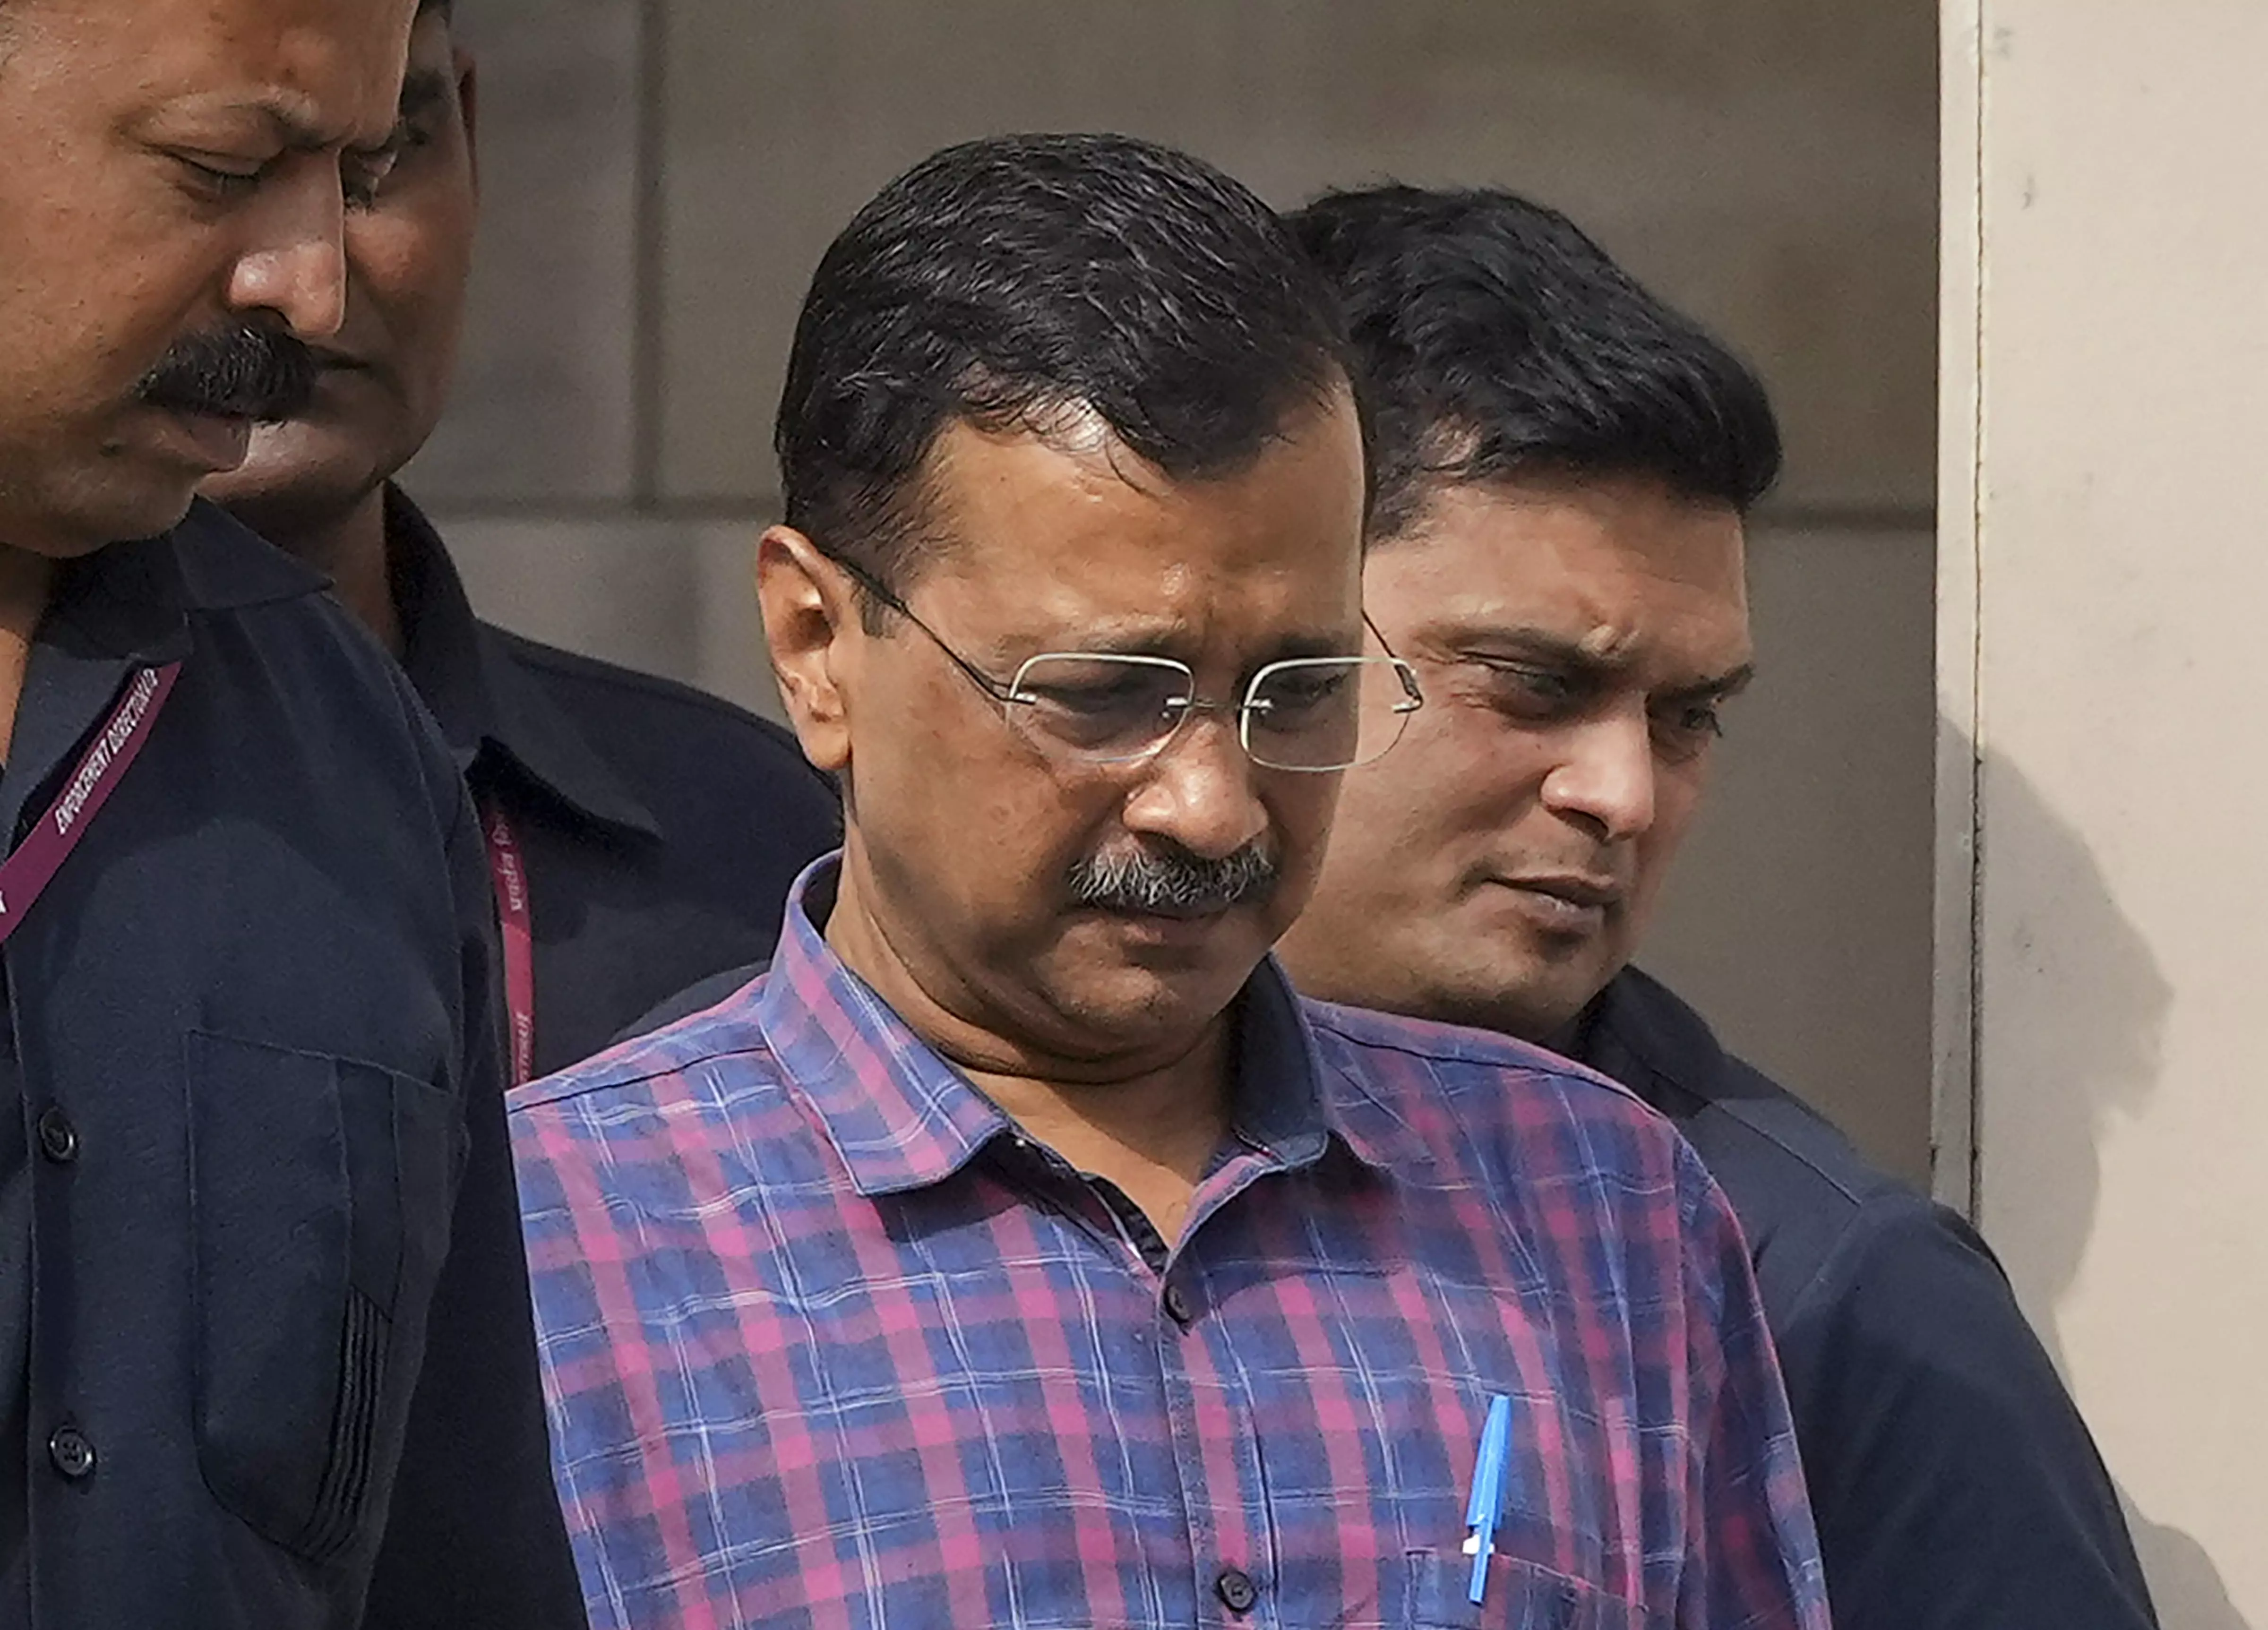 Kejriwal stopped taking insulin months before arrest, officials say citing Tihar Jail report